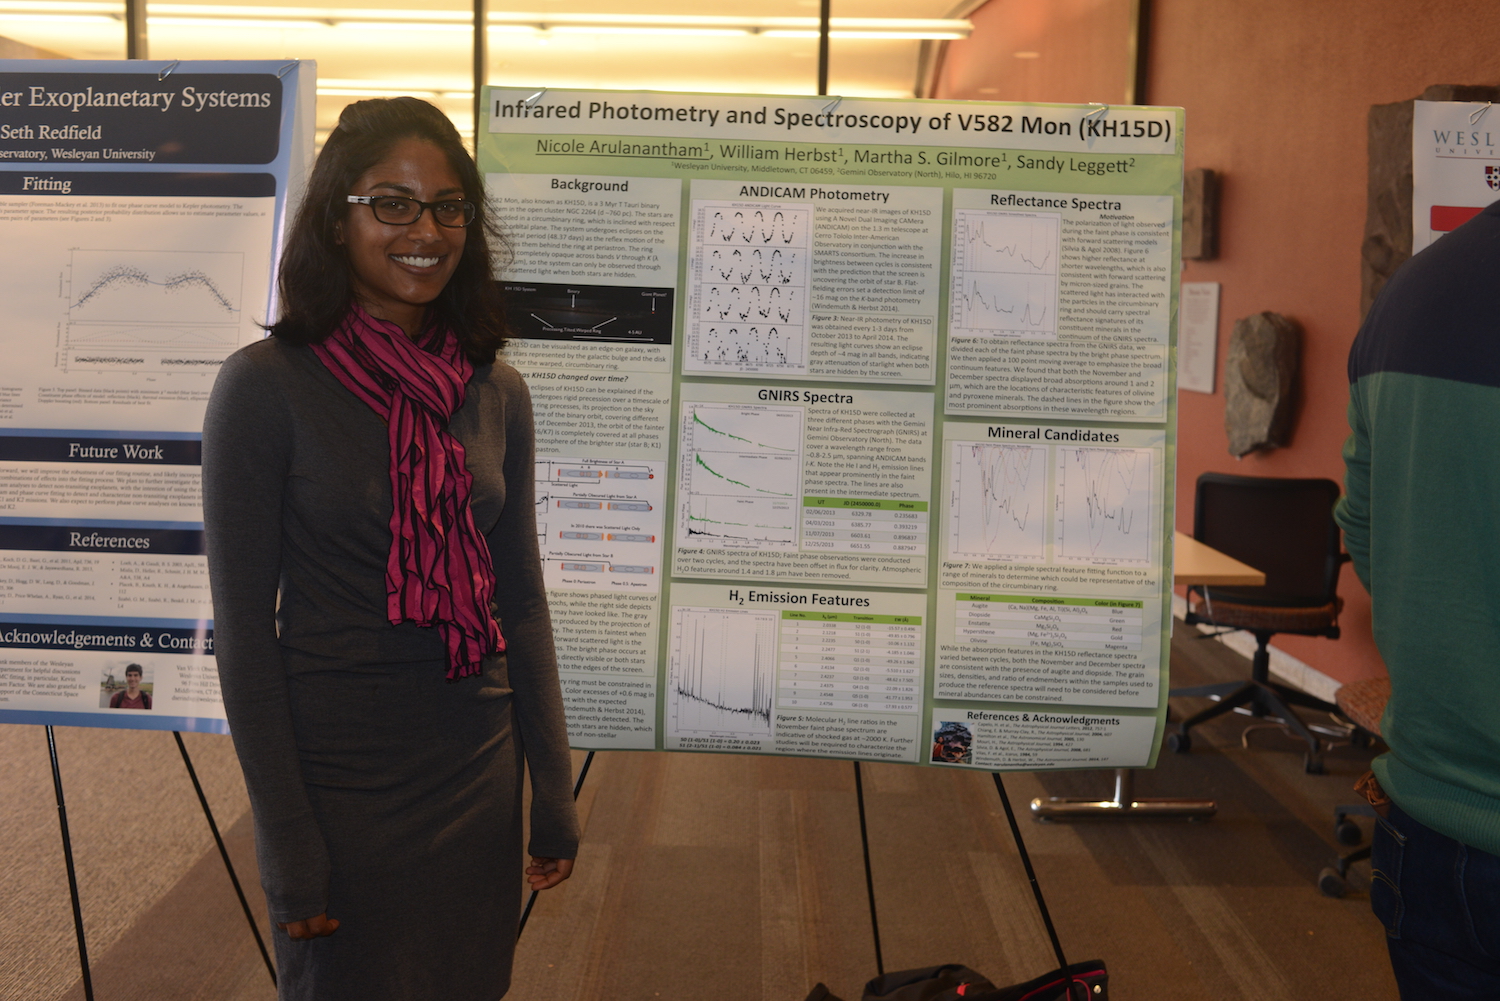 Graduate student Nicole Arulanantham presented her research, "Infrared Photometry Spectroscopy of V582 Mon (KH15D)."